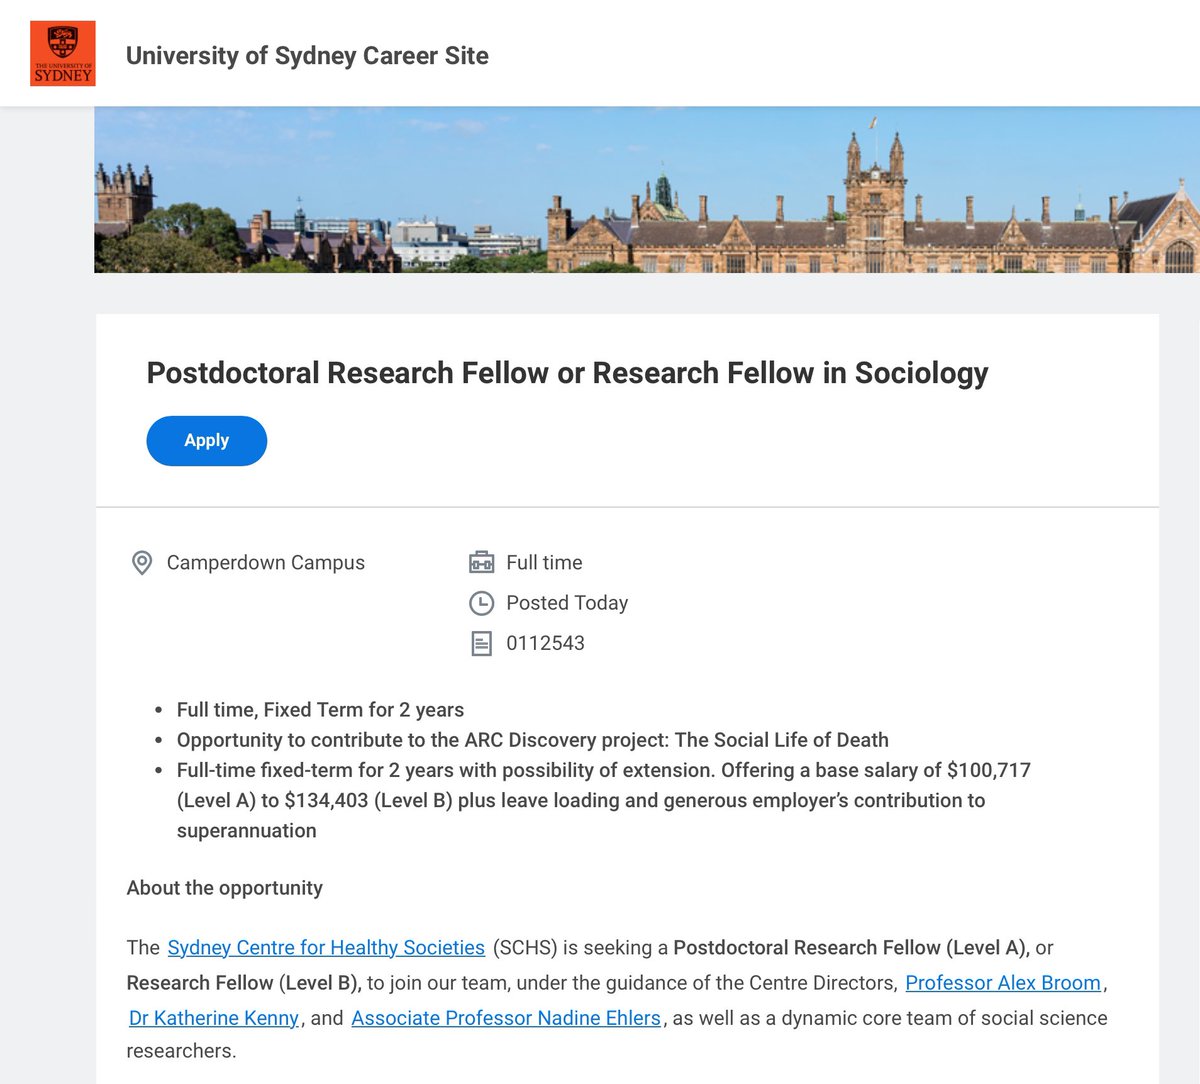 ❗️JOB❗️We are advertising for a Level A/B Postdoc (2 yrs initially), to work with us on the sociology of death, dying and bereavement. Open to a range of backgrounds - suit someone keen on qualitative and sensitive research. Join the fab @Sydney_CHS team! tinyurl.com/4998fuzj